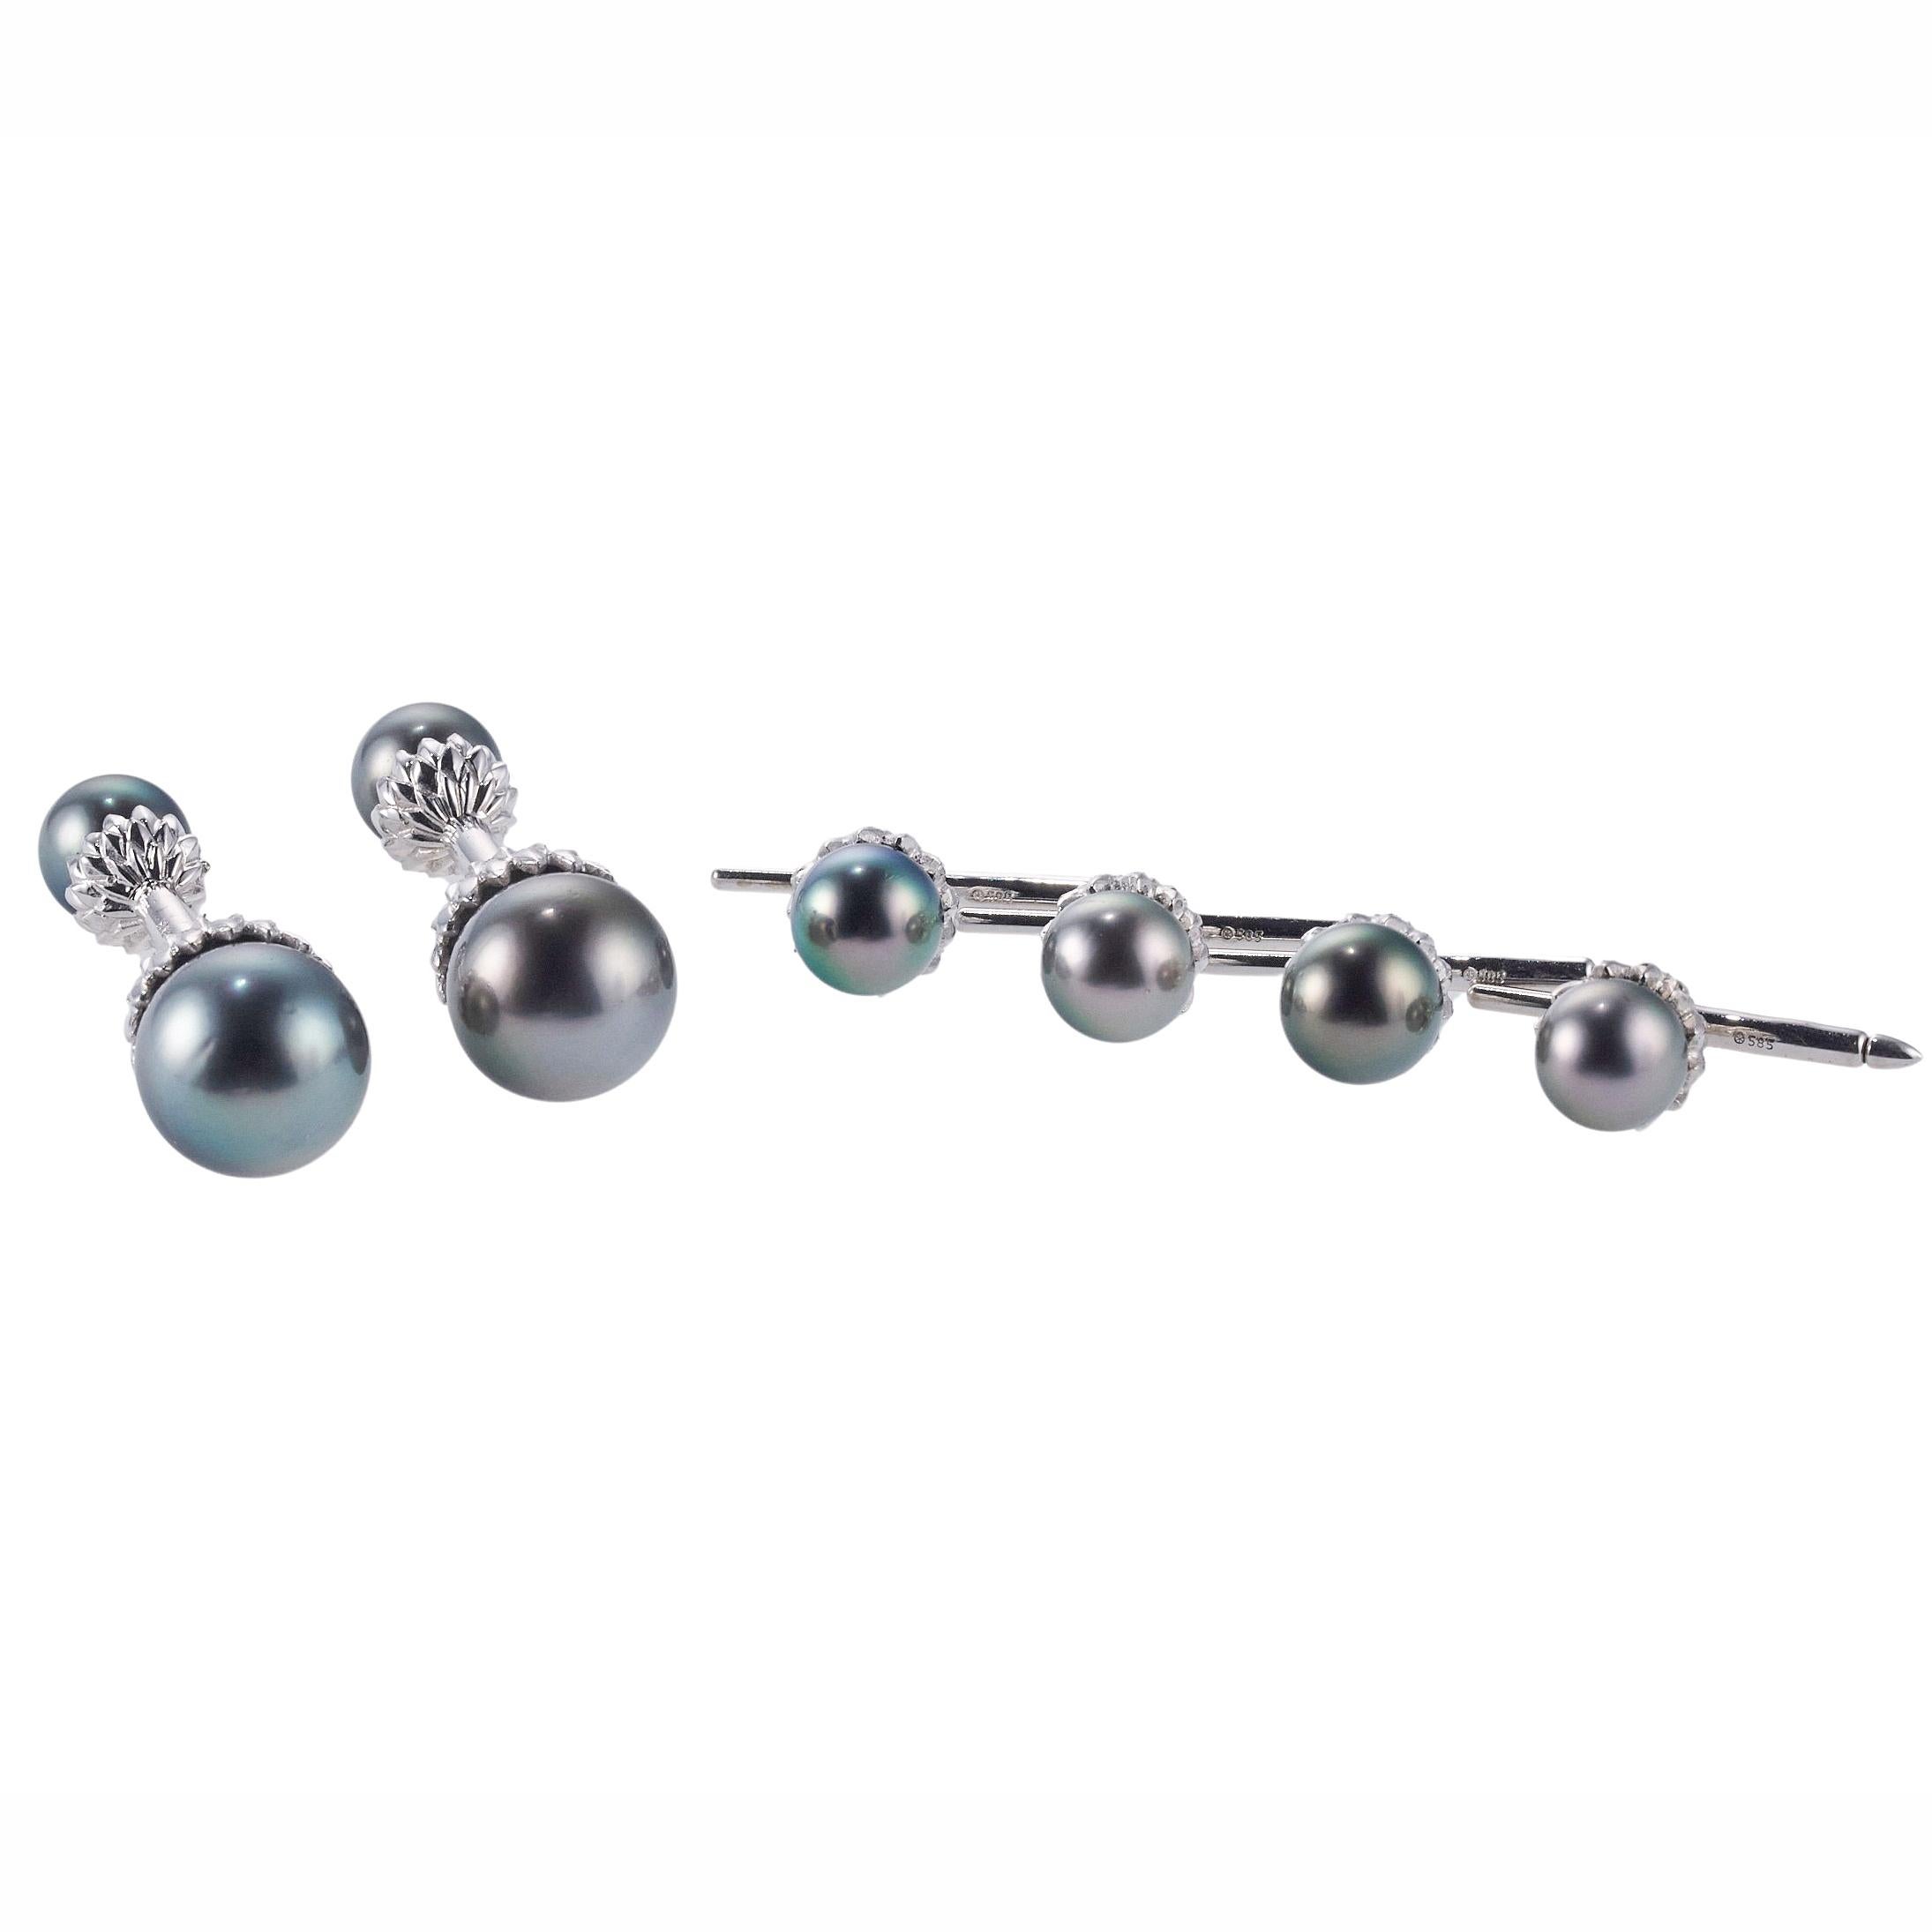 18K white gold cufflinks and stud set by Assael, made with 9mm - 13mm Tahitian South Sea Pearls. Cufflink top measures 13mm, back is 9mm; Stud top is 9.3mm. Weight is 32.4 grams. Marked: 18k, 585 (stud hardware). Retail Value $9500.